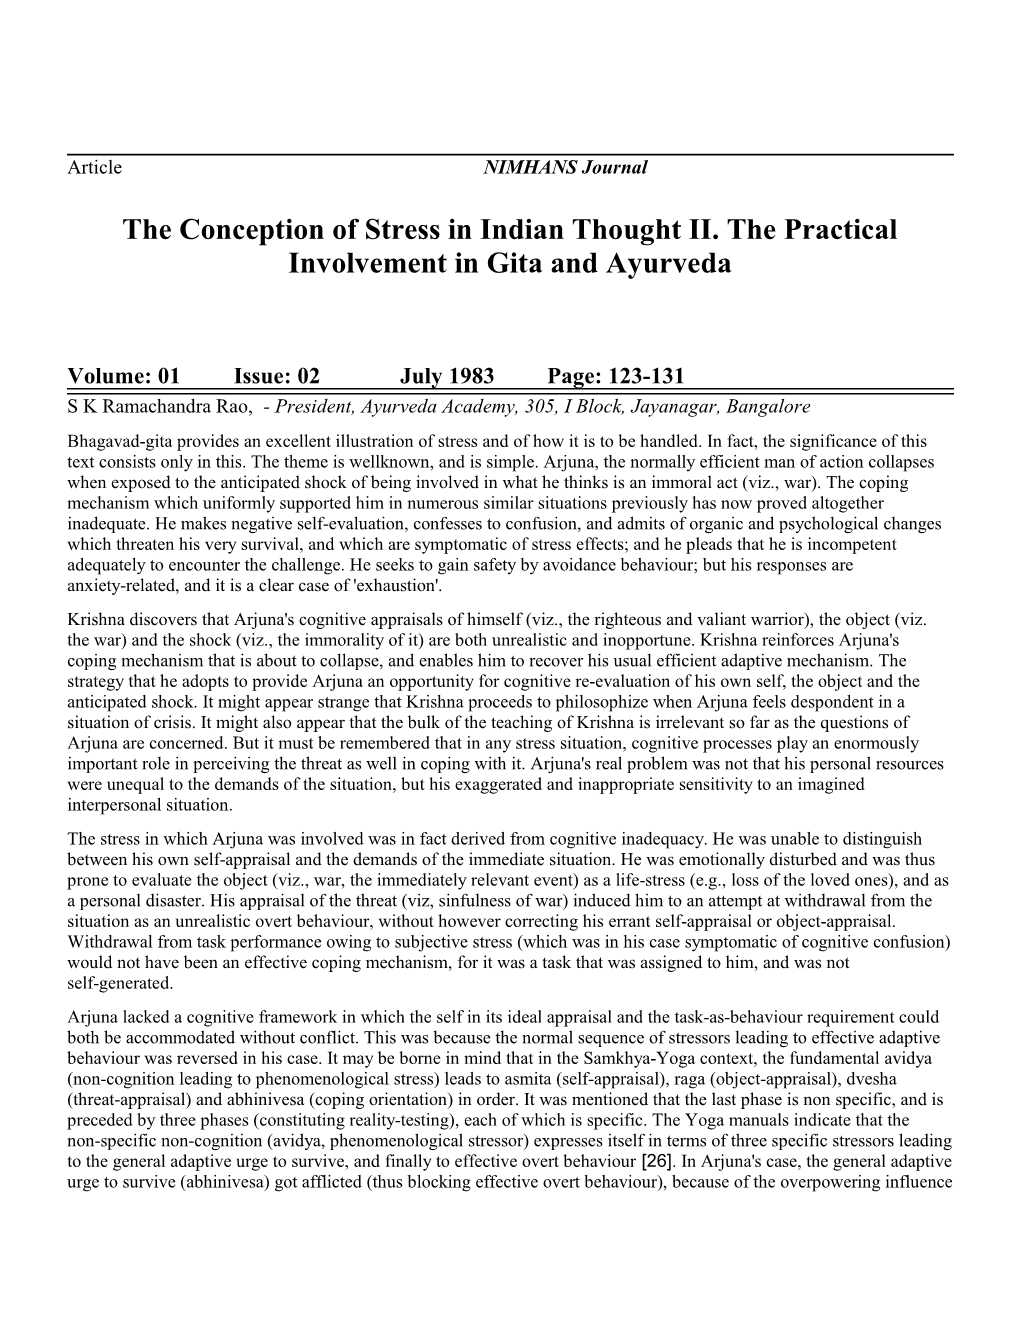 The Conception of Stress in Indian Thought II. the Practical Involvement in Gita and Ayurveda